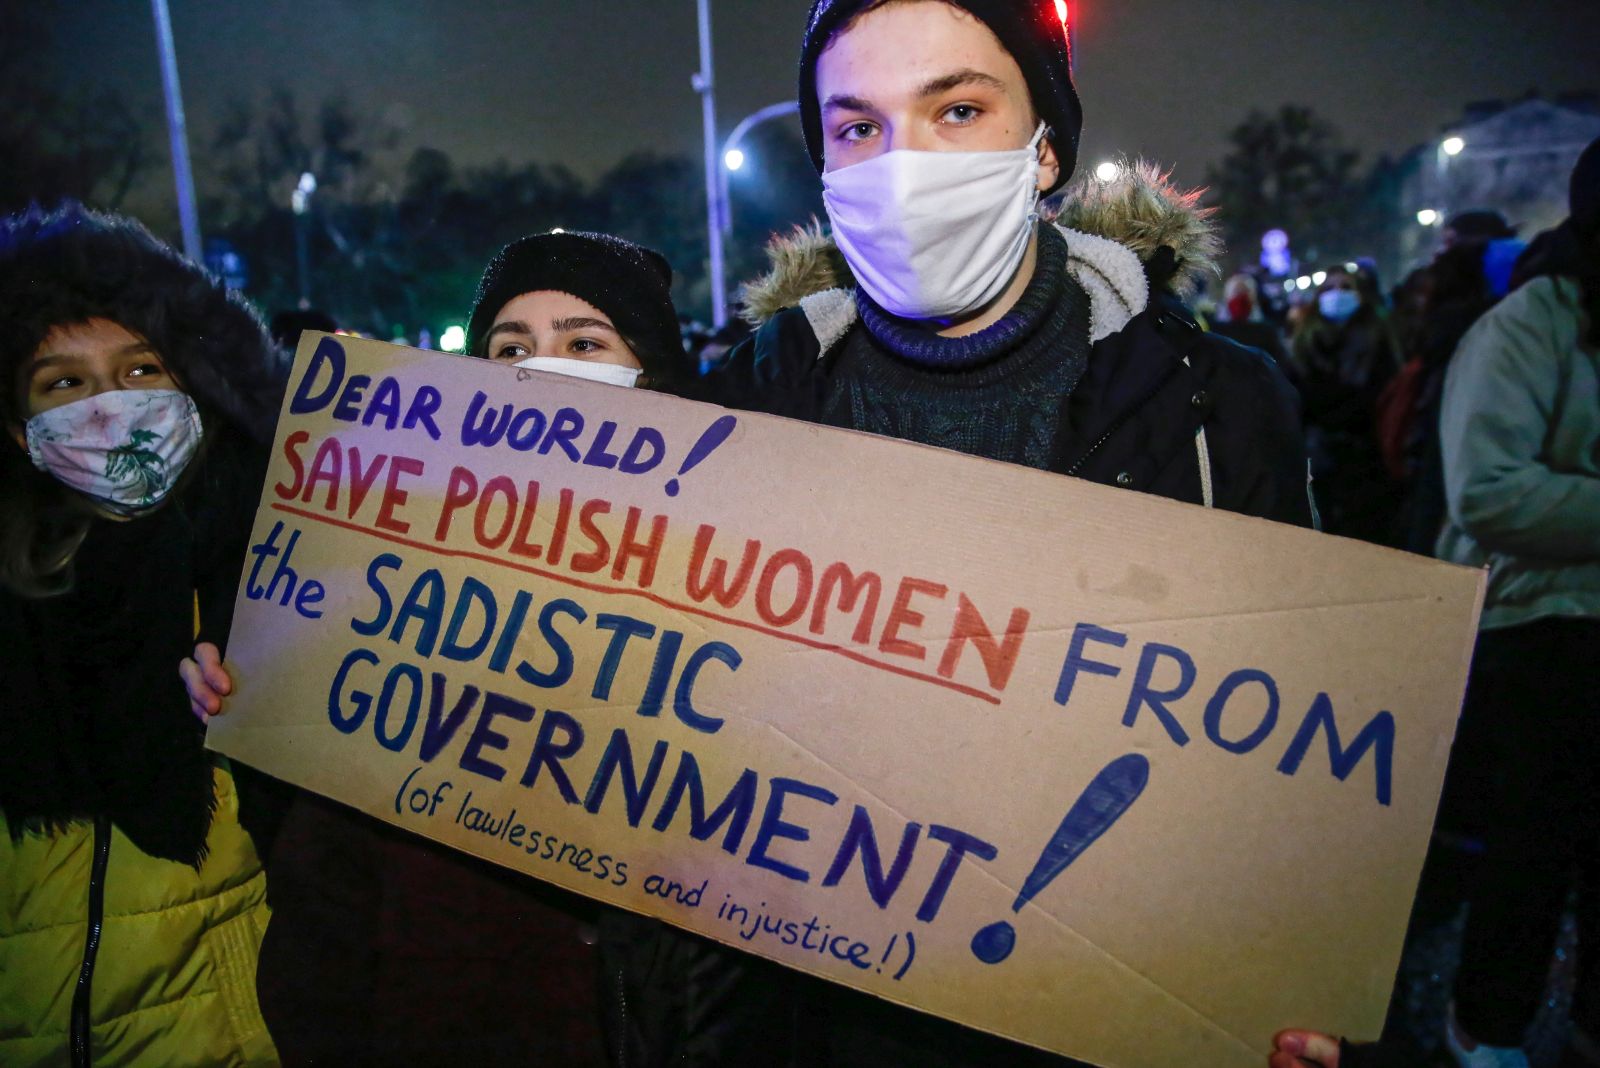 epa08971745 People take part in the 'Women's Strike' protest against the tightening of the abortion law in Warsaw, Poland, 28 January 2021. Poland's Constitutional Tribunal on 27 January published its verdict from October 2020 that laws currently permitting abortion due to foetal defects are unconstitutional. Under the new rules, terminations will be permitted only in cases of rape and incest, or when the mother's life or health is endangered. Mass protest against the tightening of the abortion law broke out throughout Poland with thousands of people protesting against tightening the abortion law.  EPA/Rafal Guz POLAND OUT